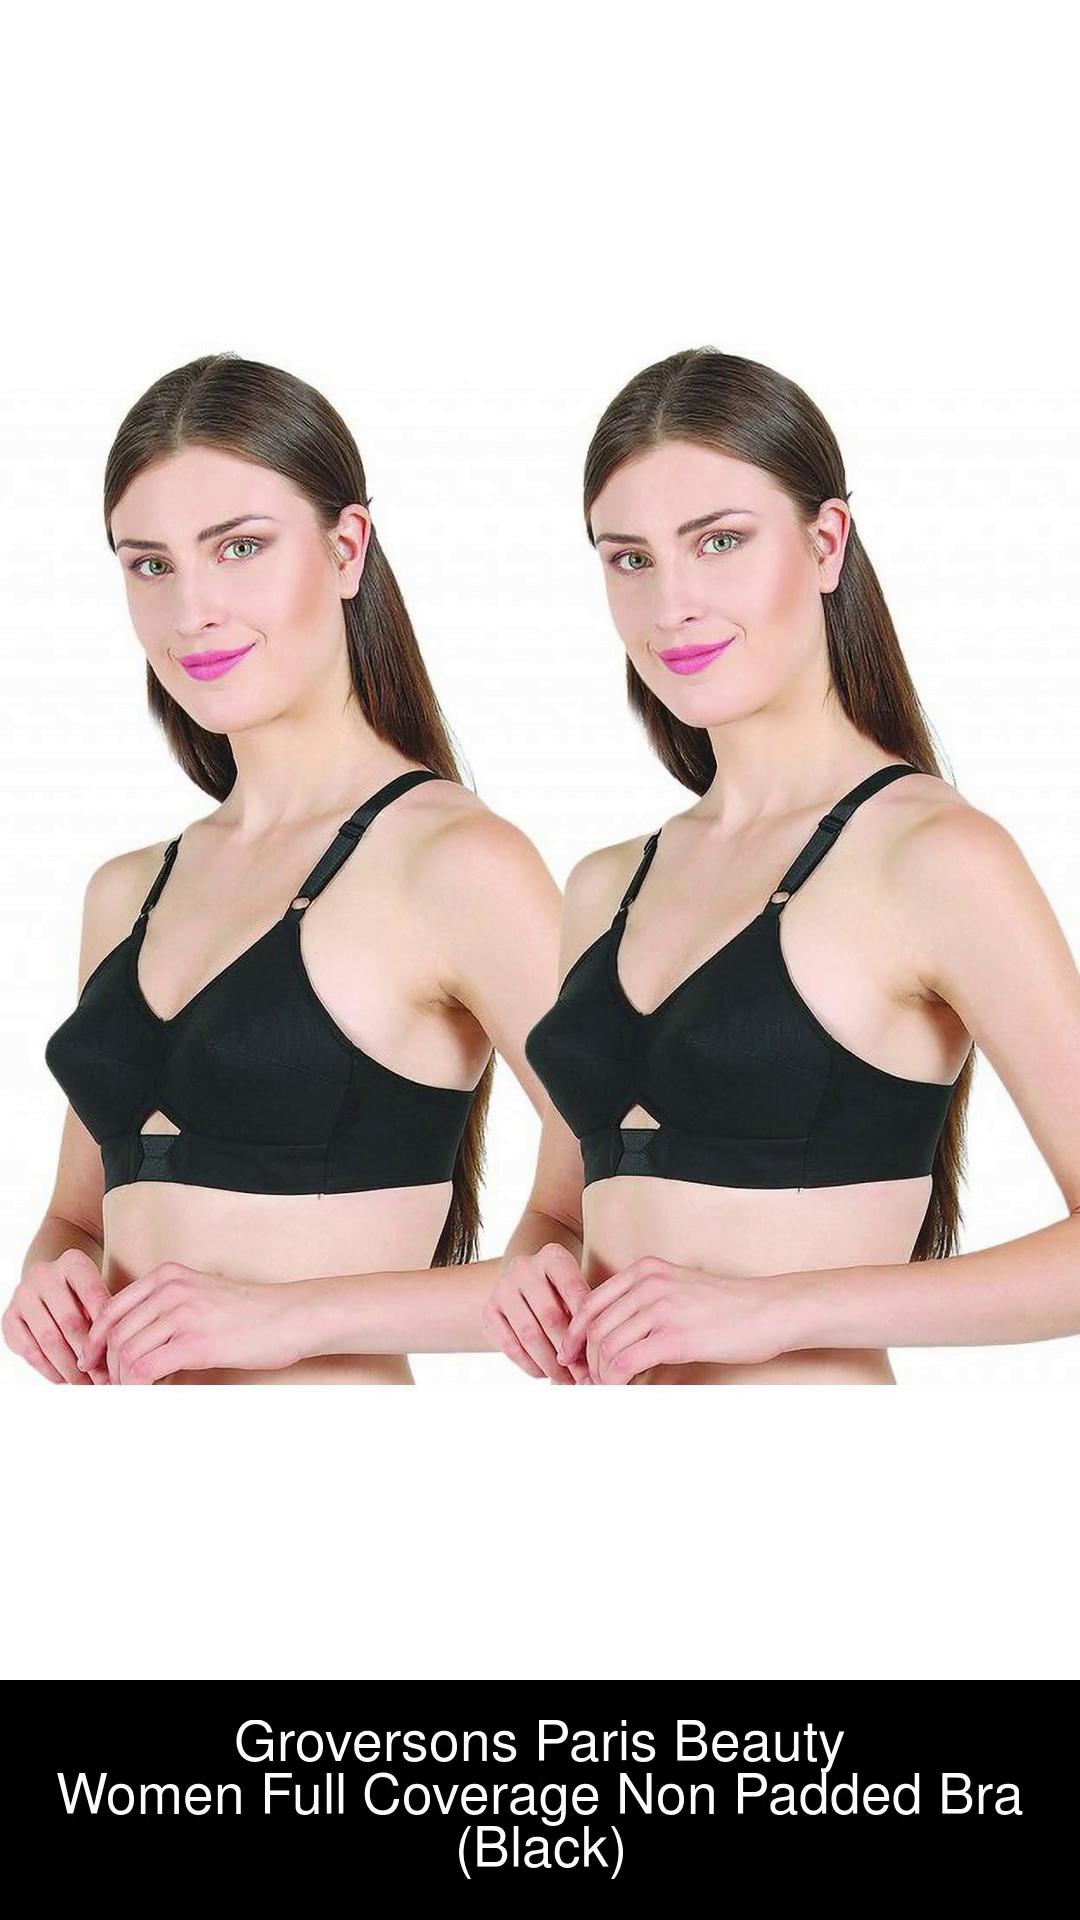 Groversons Paris Beauty CHANDERKIRAN Women Full Coverage Non Padded Bra -  Buy Groversons Paris Beauty CHANDERKIRAN Women Full Coverage Non Padded Bra  Online at Best Prices in India